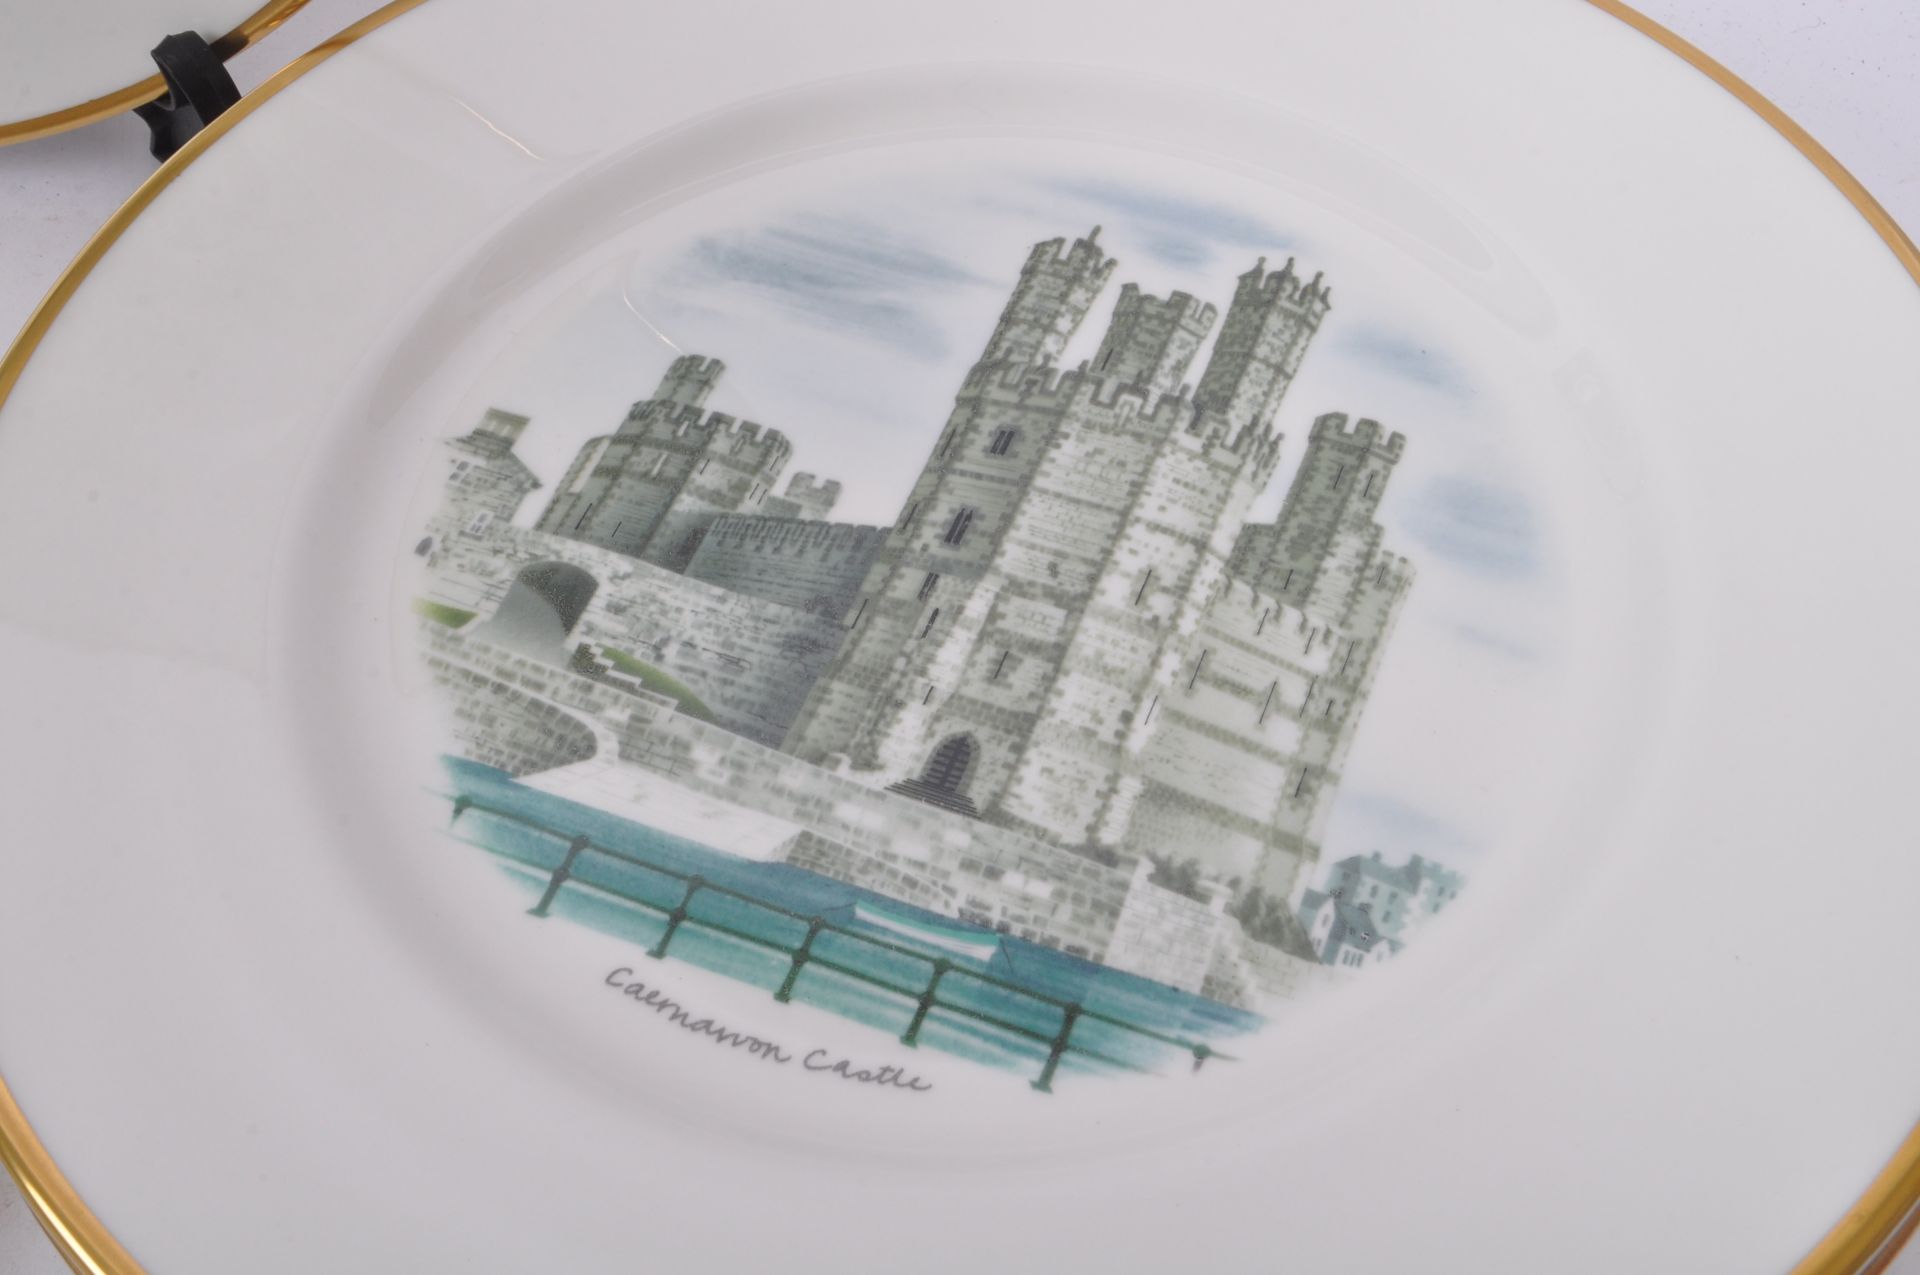 WEDGWOOD - CASTLE & COUNTRY HOUSE PORCELAIN PLATES - Image 10 of 11